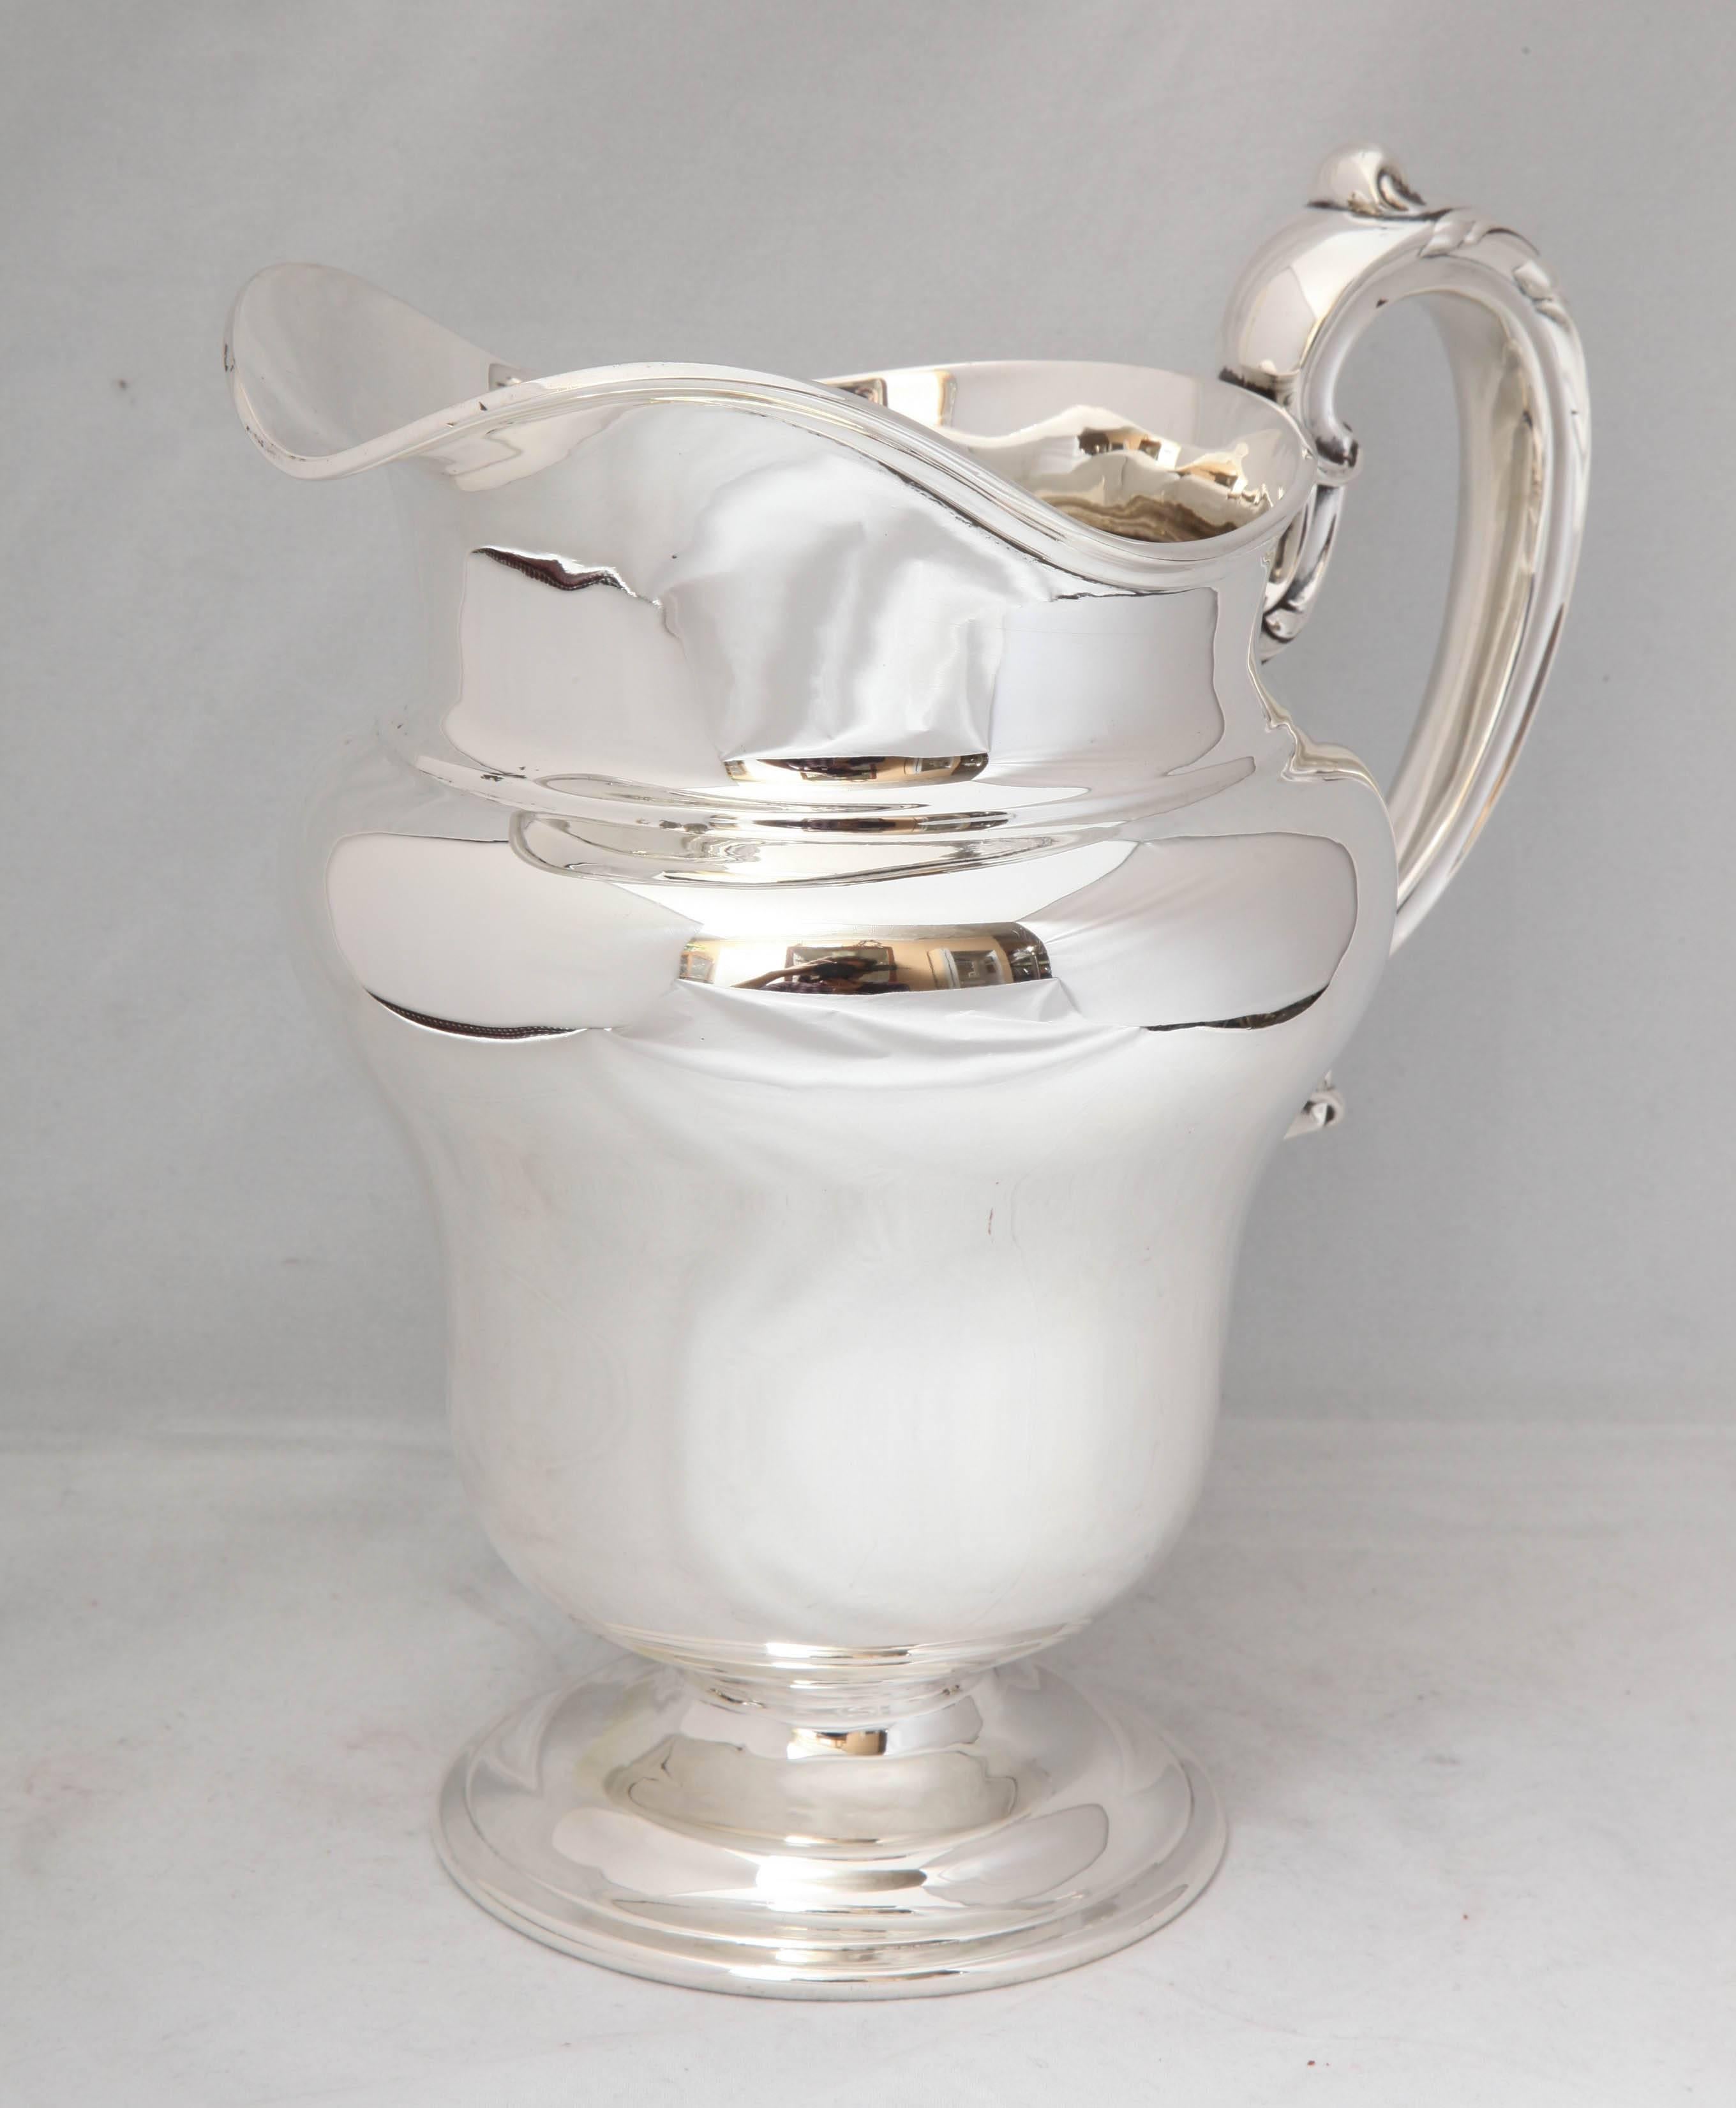 Graceful, Art Nouveau, sterling silver water pitcher on baluster base, The Frank M. Whiting &  Co., No. Attleboro, Mass., circa 1895. Holds 3 3/4 pints of liquid. 8 3/4